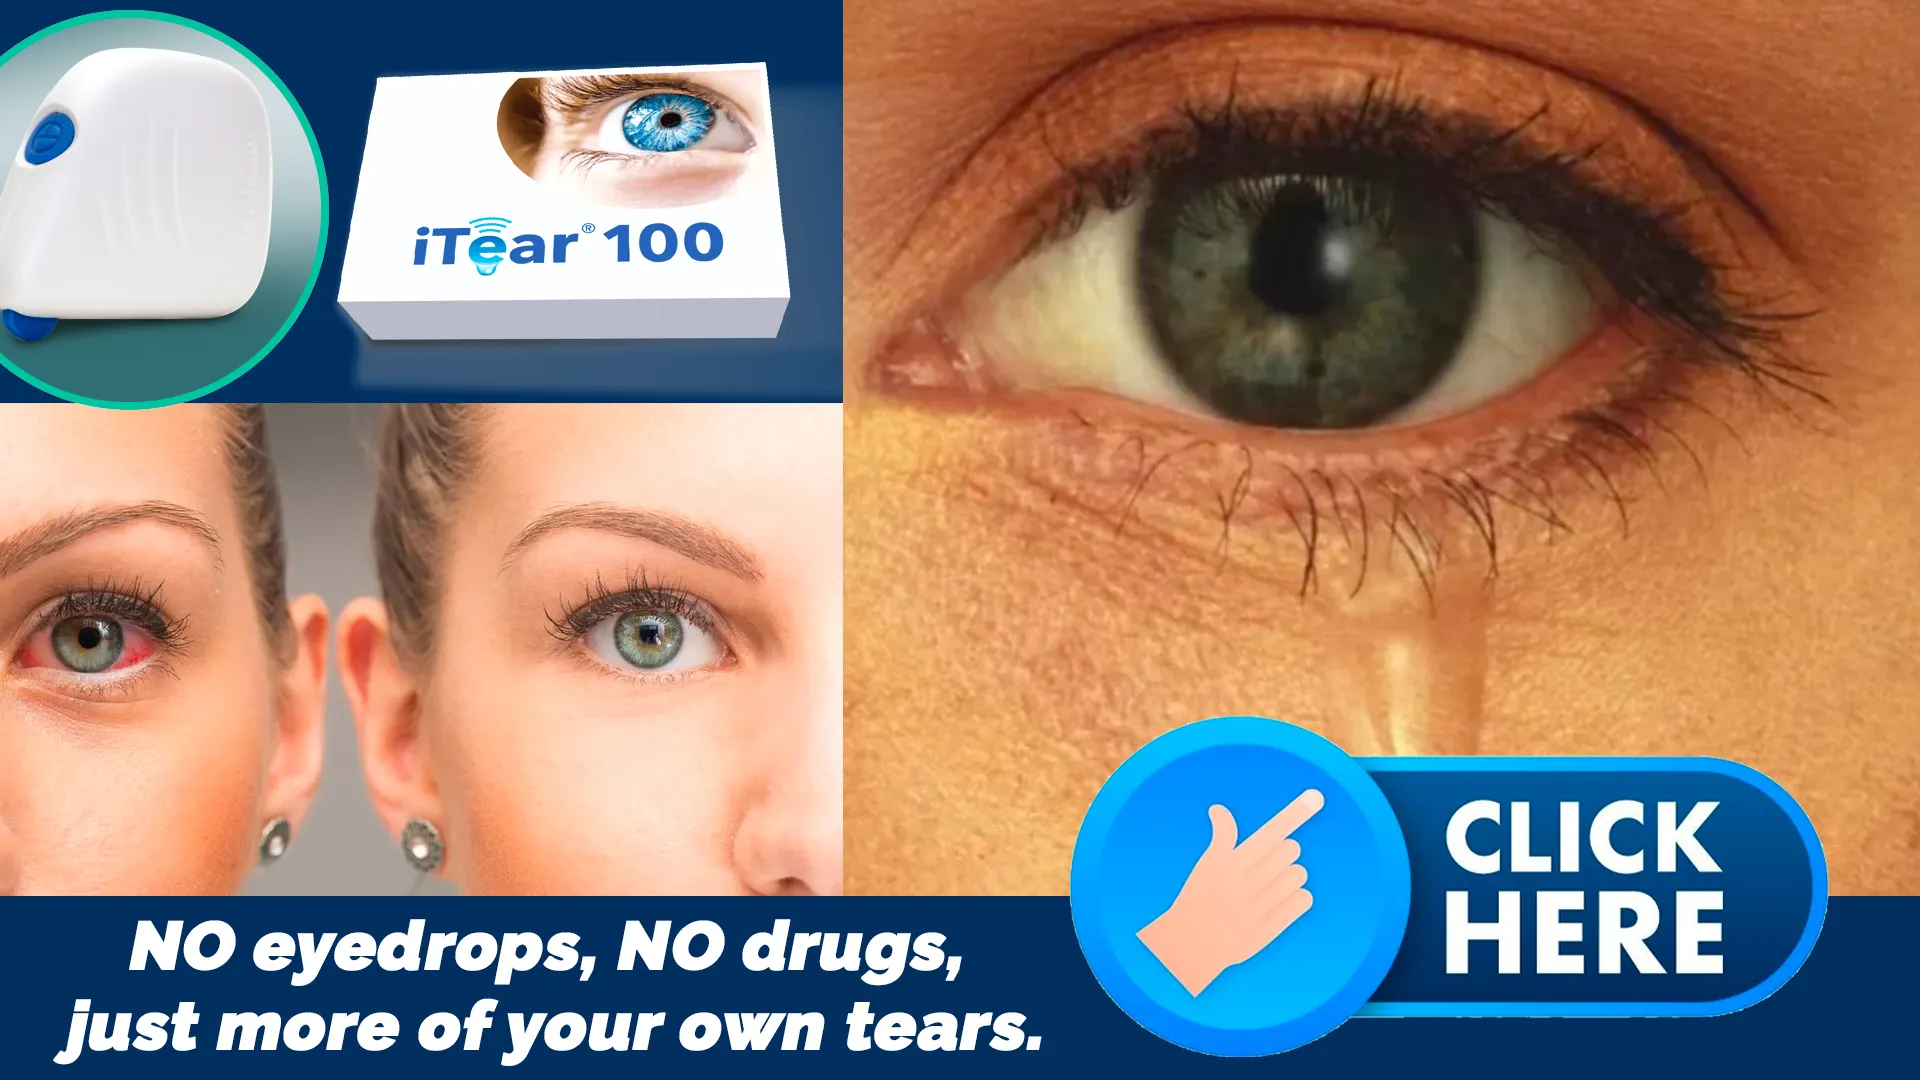 Ordering Your Very Own iTear100